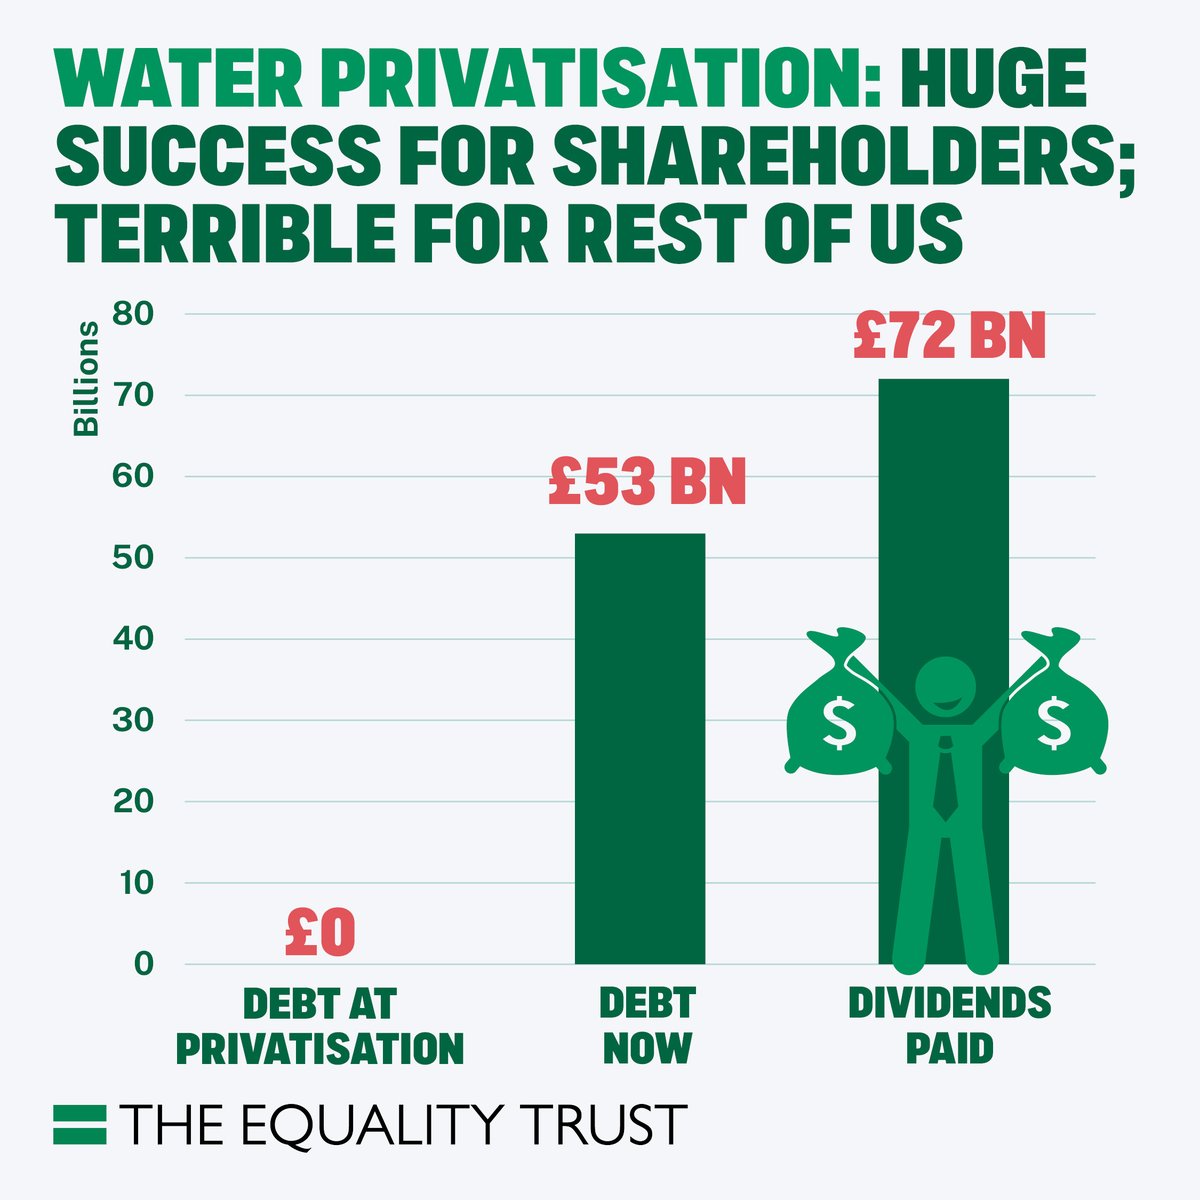 Since privatisation in 1989, water companies have been loaded with debt – not to invest in infrastructure, but to pay billions to shareholders. Every other country thought England and Wales were insane to privatise water like this, and they were right.